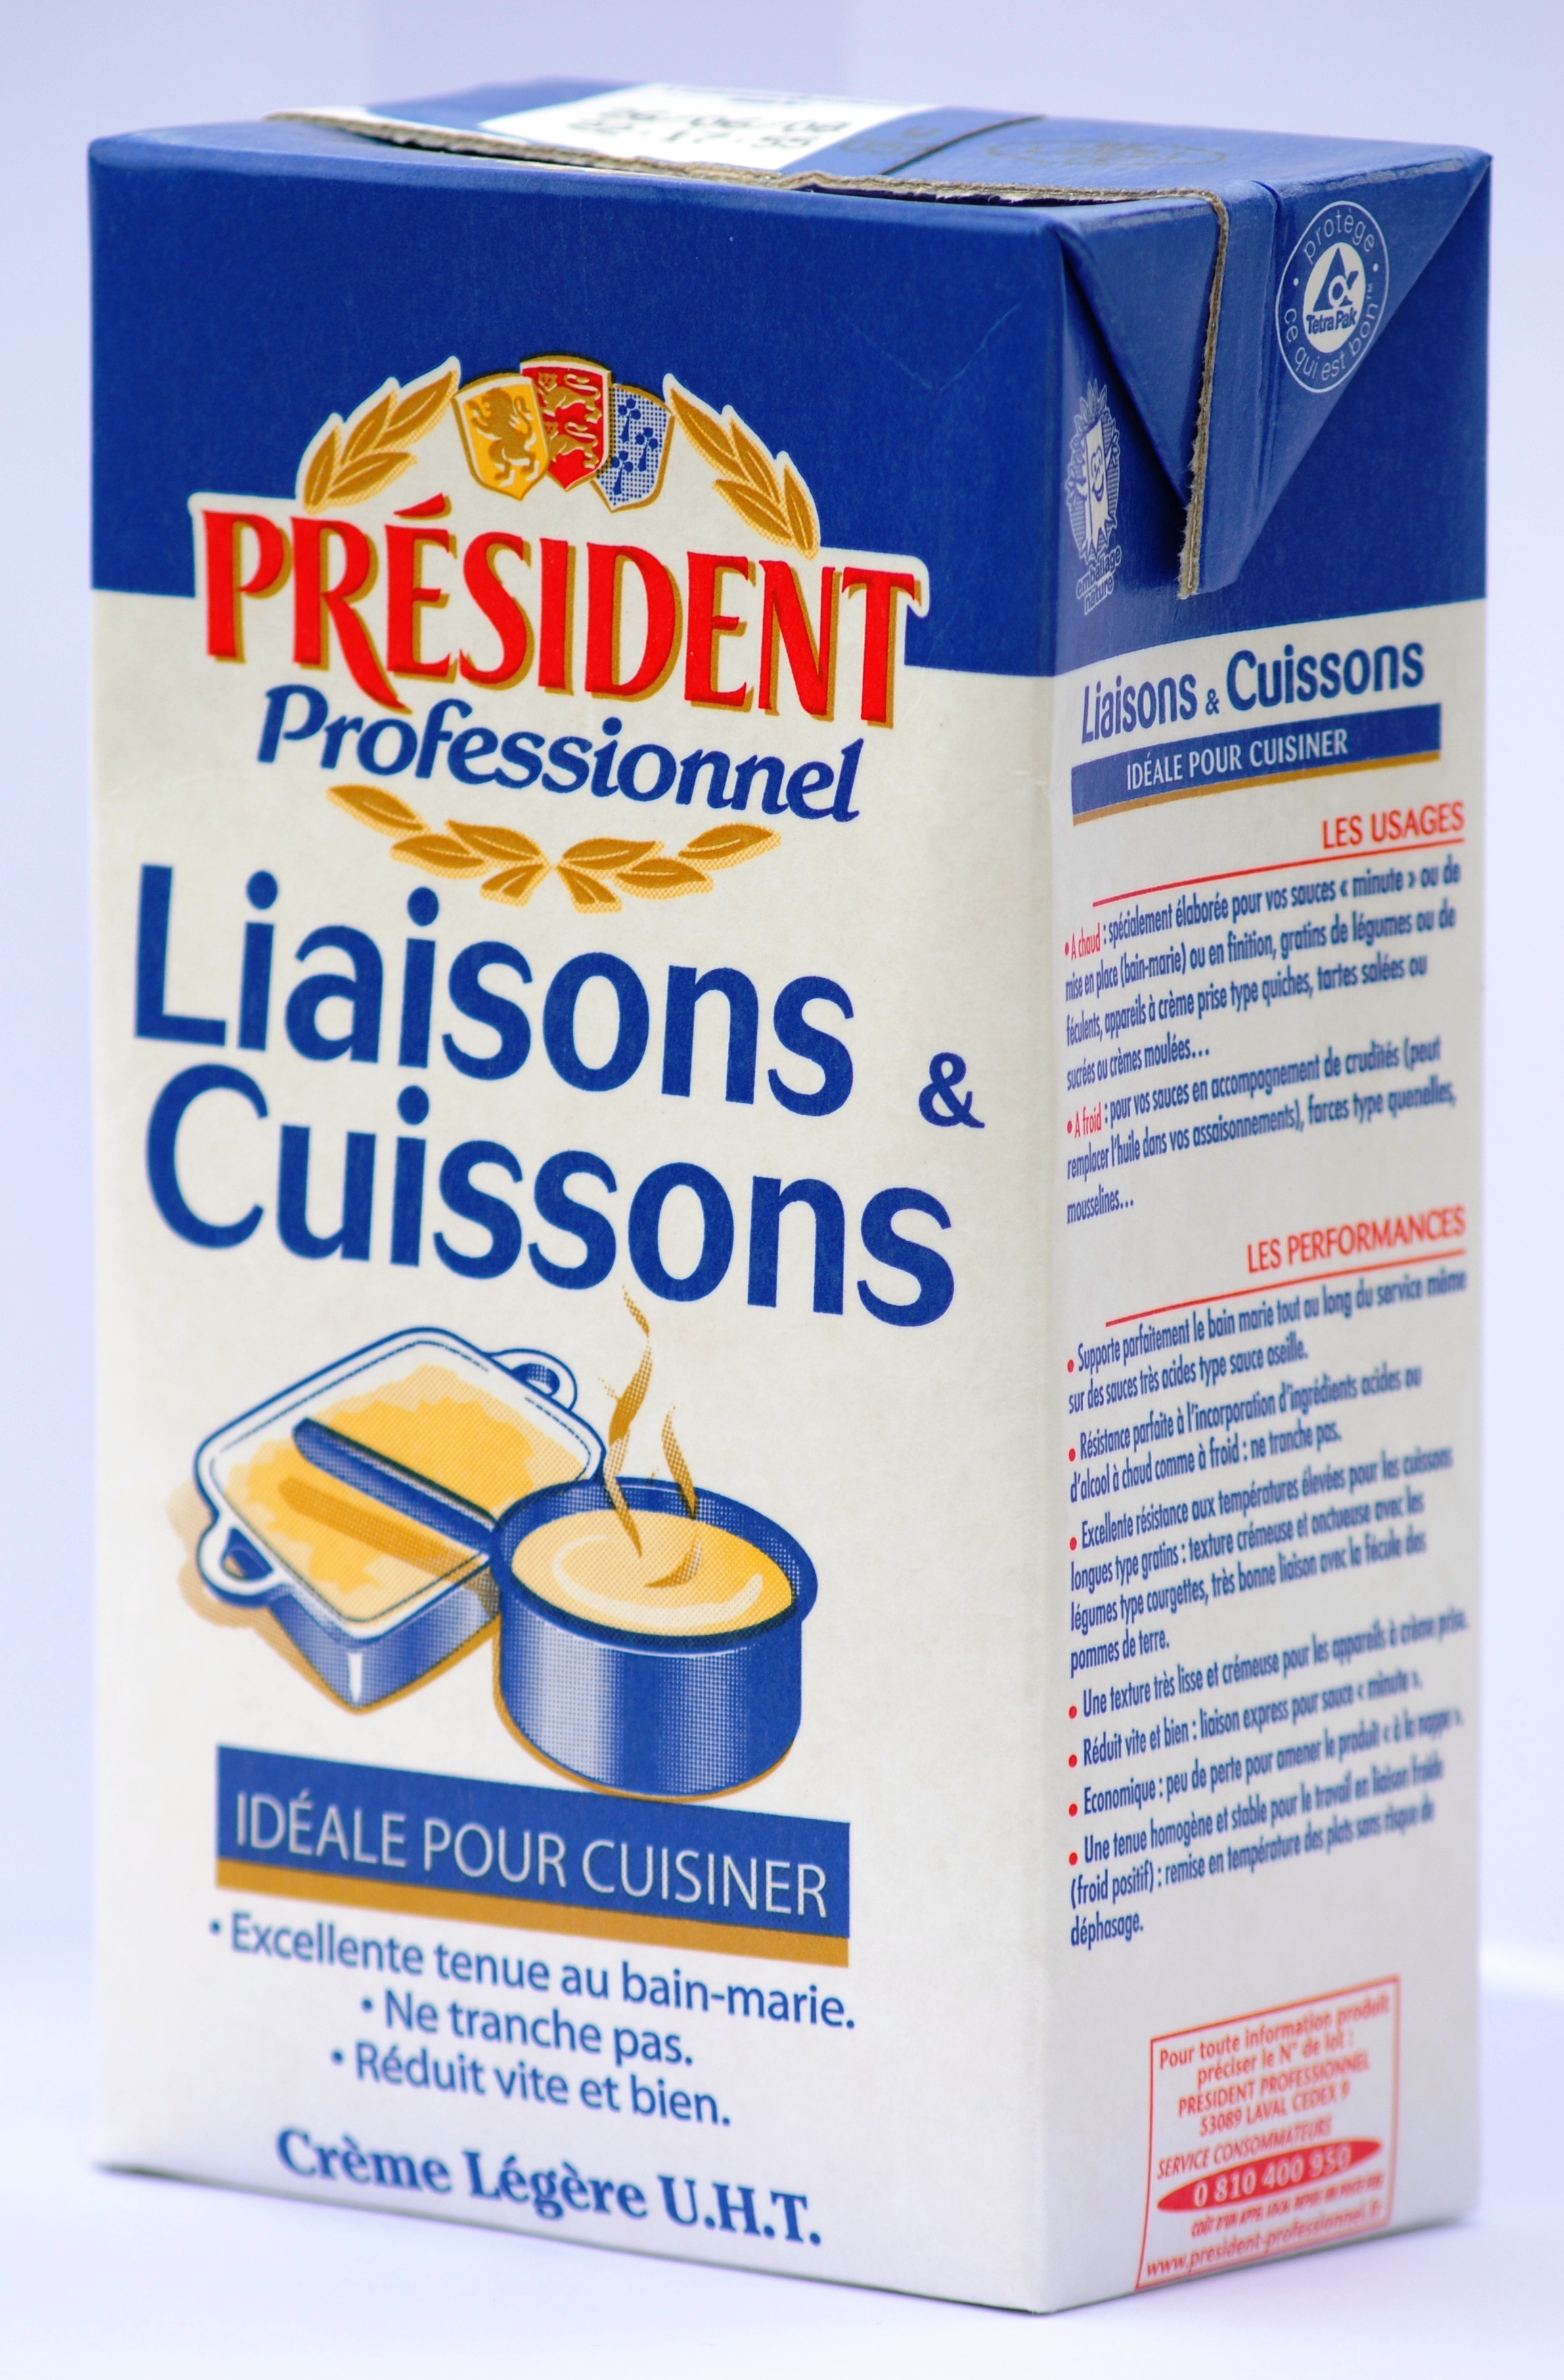 President Liaisons & Cuissons Professionel Room culinair UHT 6x1L 18%